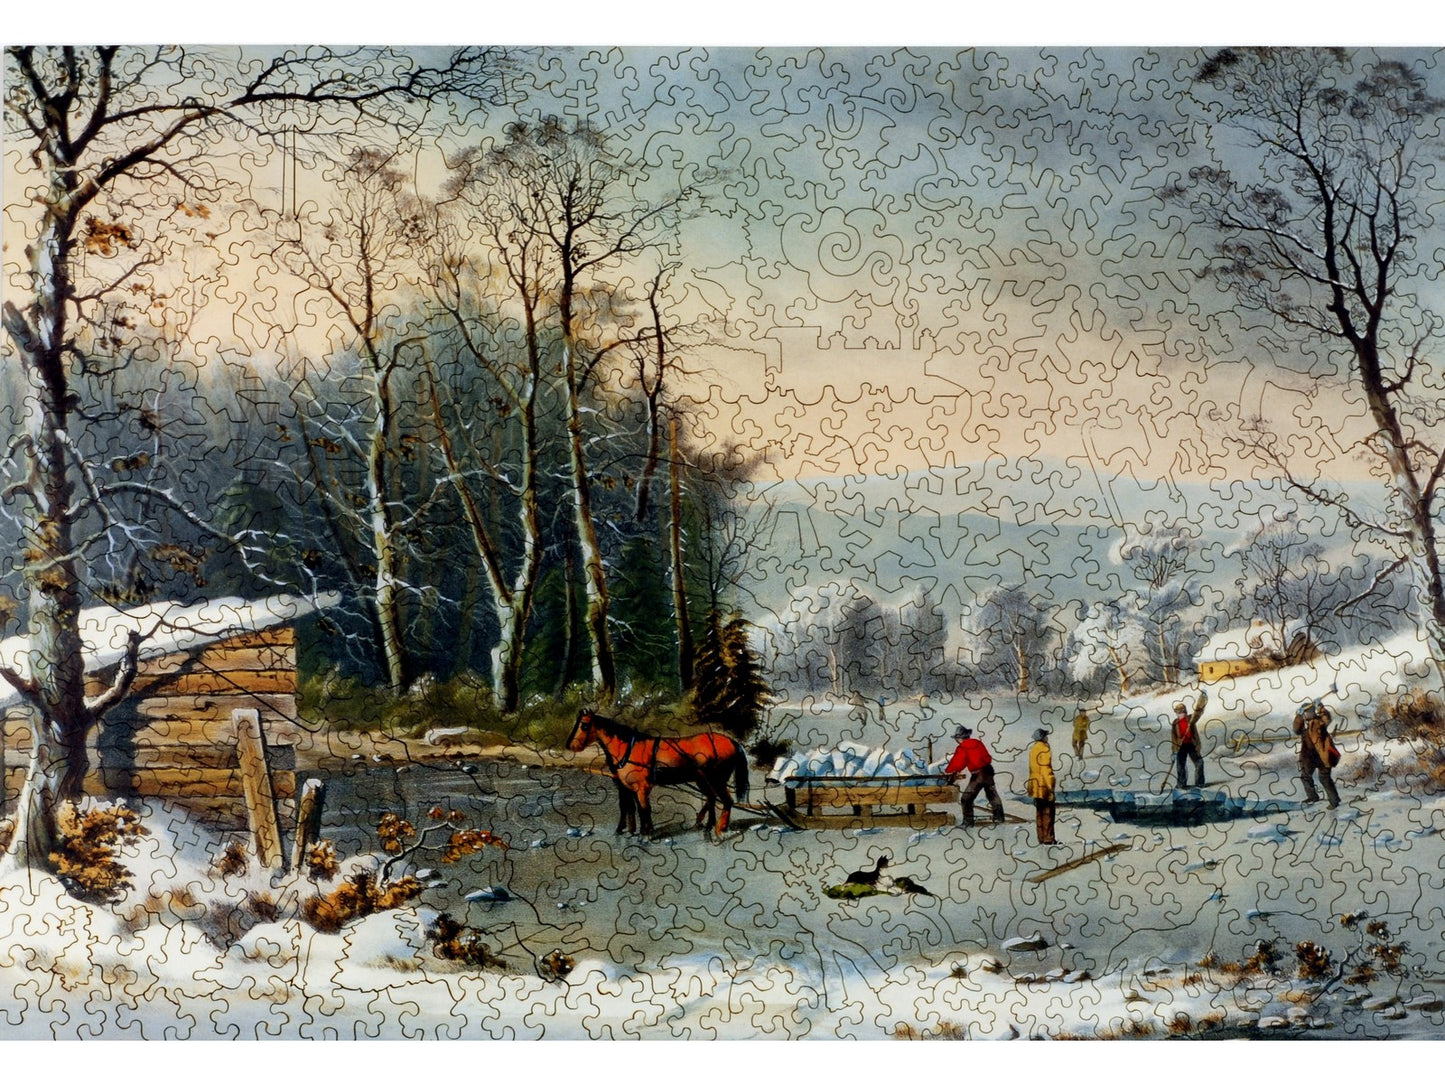 The front of the puzzle, Winter in the Country: Gathering Ice, which shows people cutting ice from a frozen pond and loading it into a horse drawn sleigh.